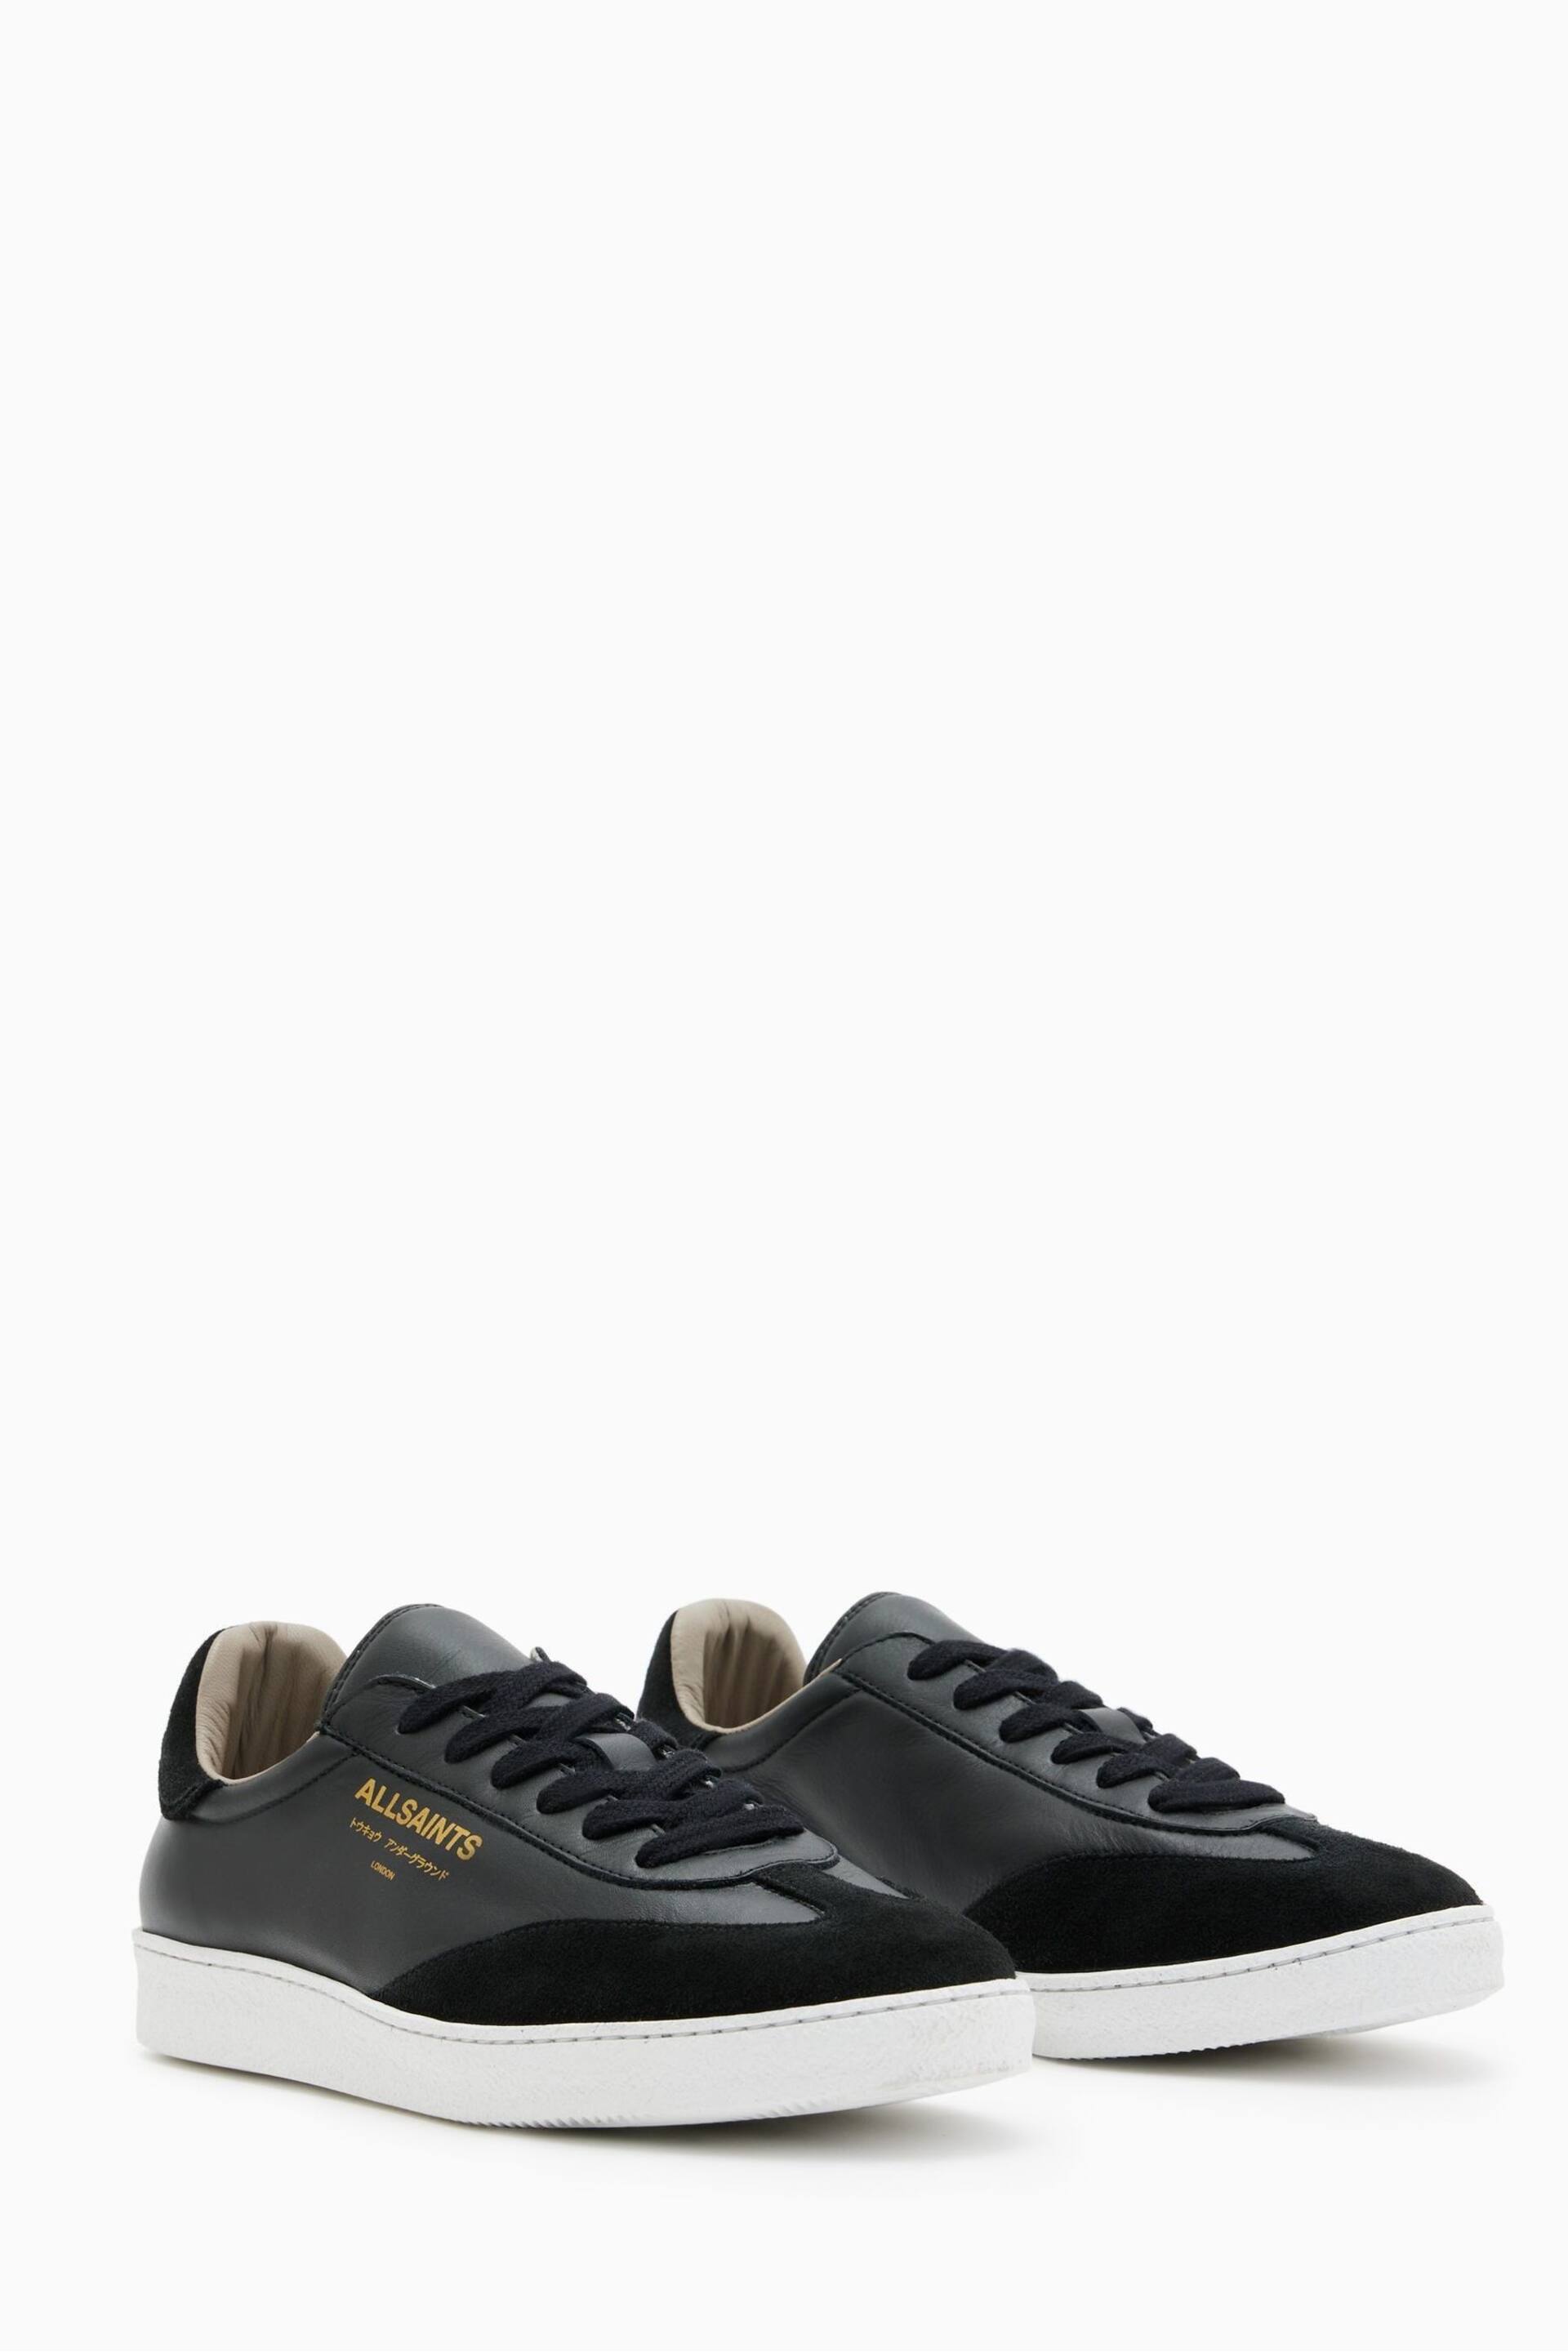 AllSaints Black Thelma Sneakers - Image 2 of 5